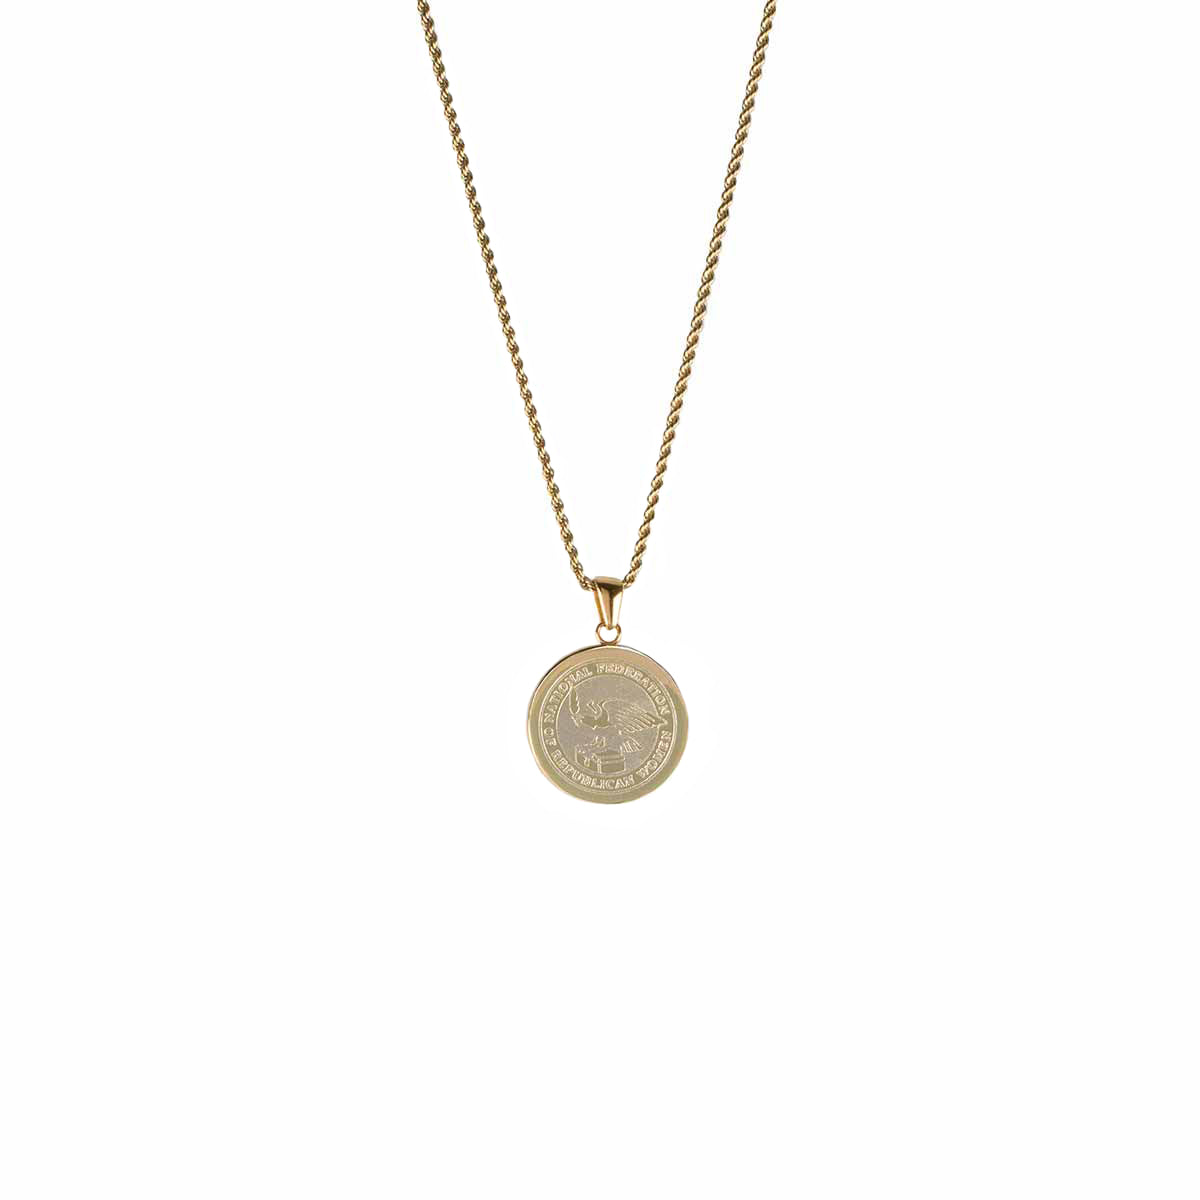 NFRW Logo Engraved Necklace Gold